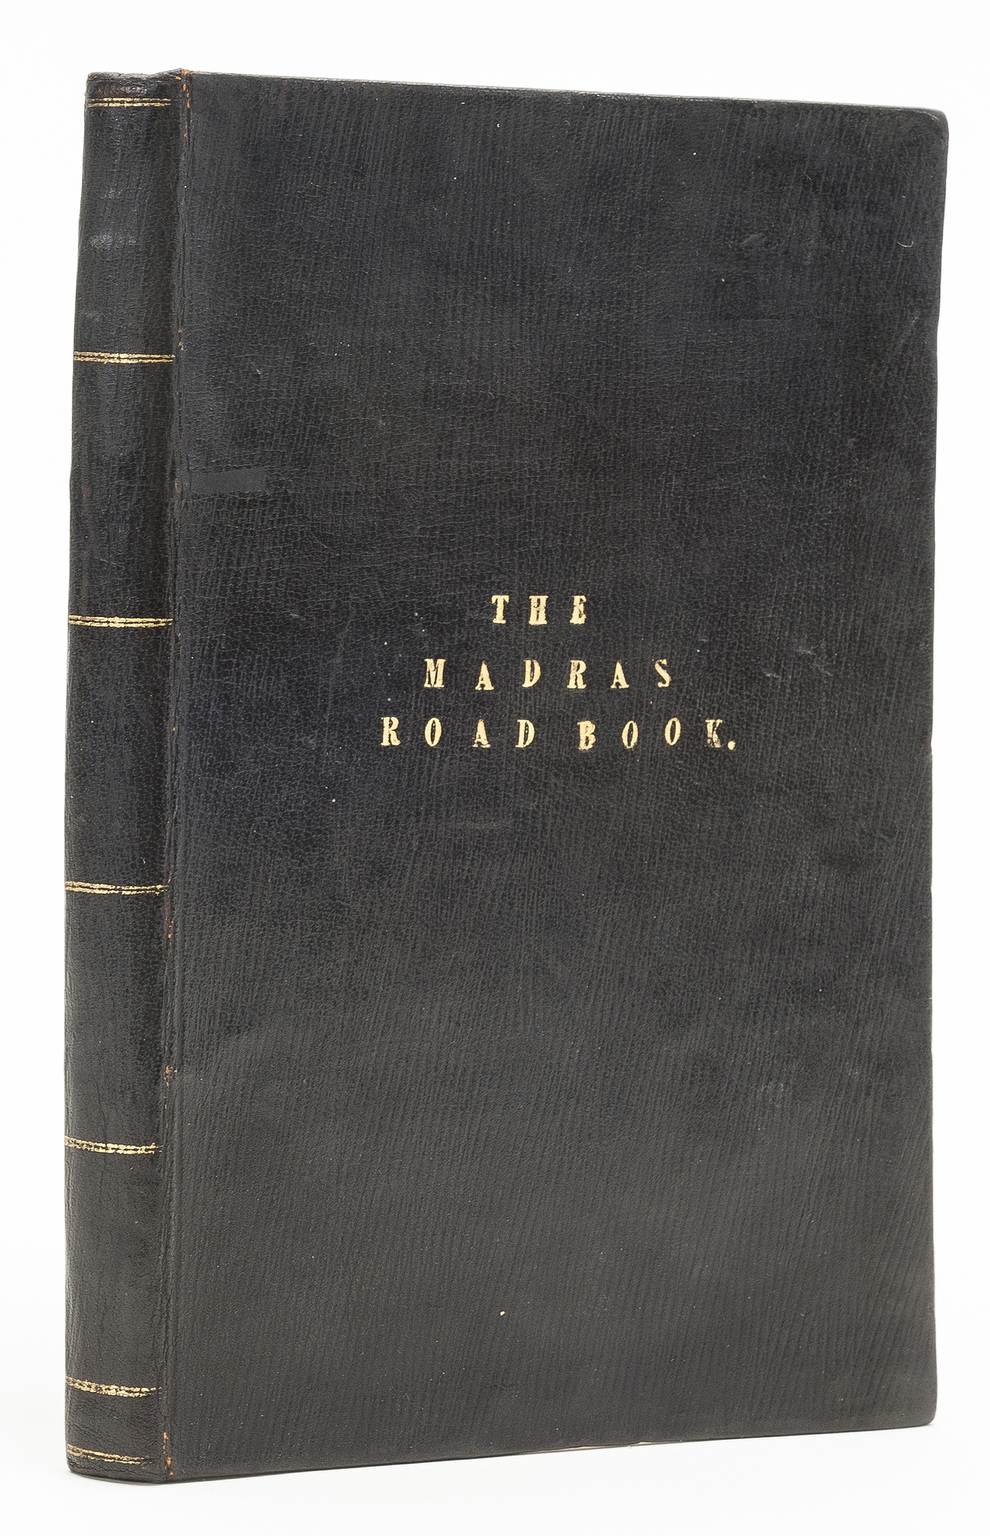 India.- [Butterworth (Captain William John)] The Madras Road Book, second edition, Madras, George … - Image 2 of 2